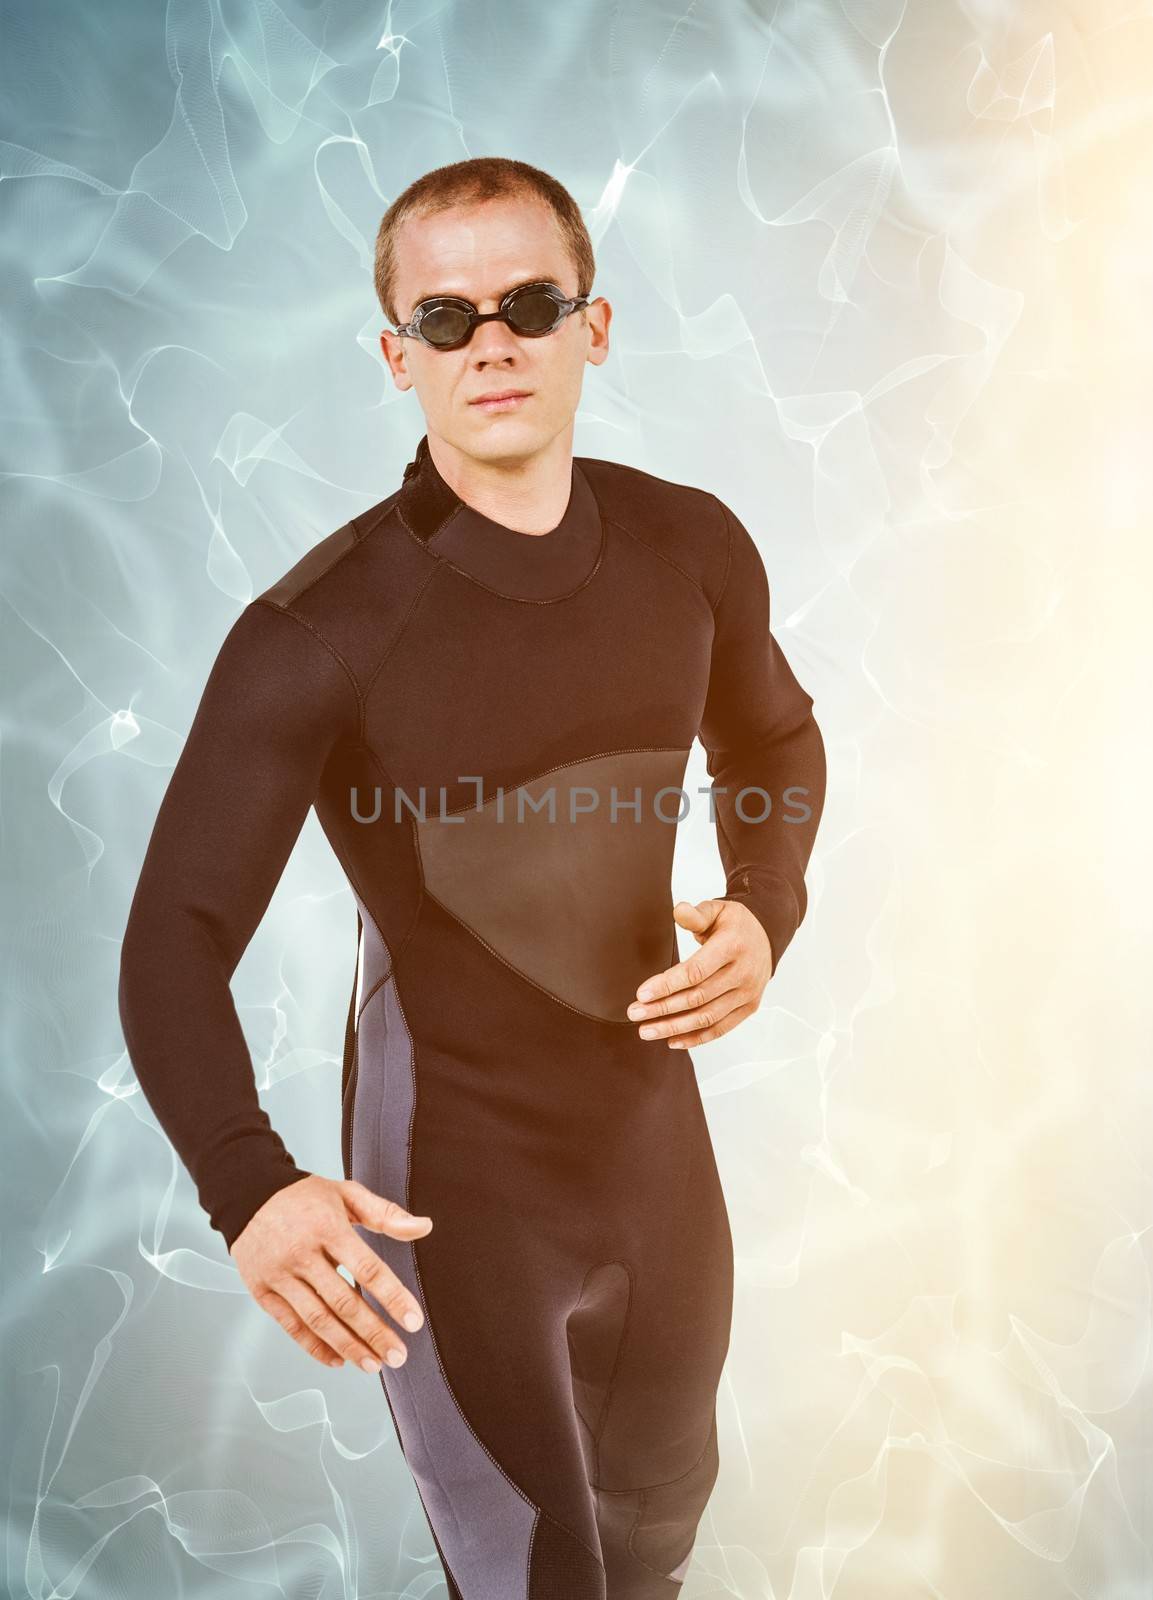 Composite image of swimmer in wetsuit and swimming goggles by Wavebreakmedia